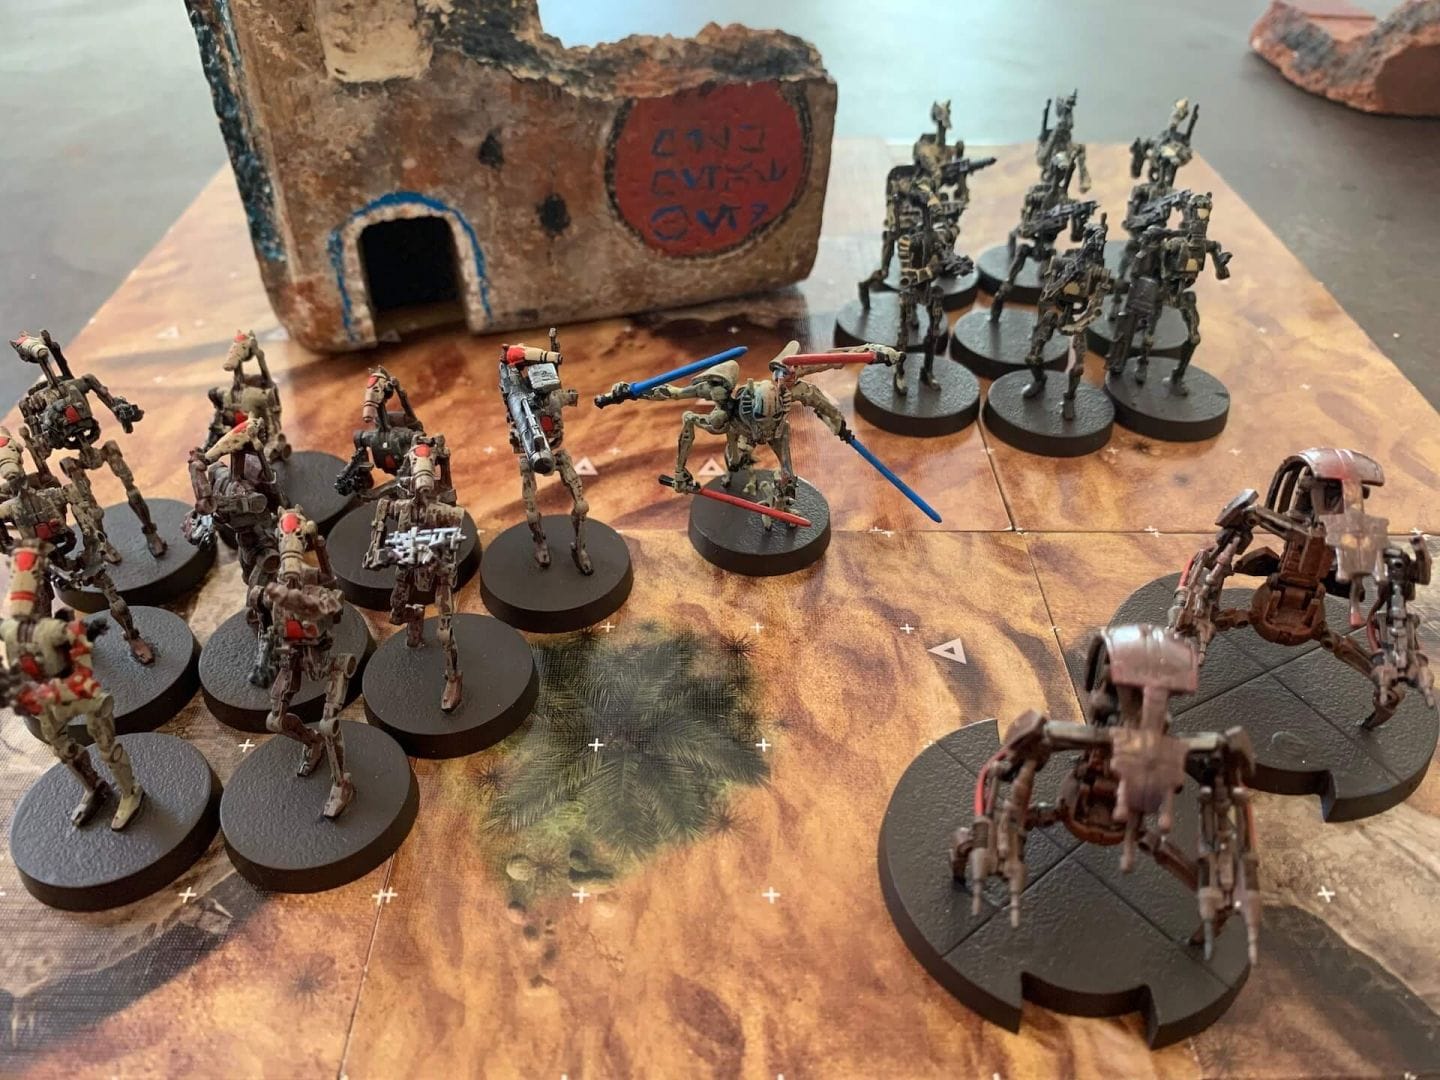 General Grievous leads an overwhelming number Separatist Battle Droids in Star Wars: Legion.